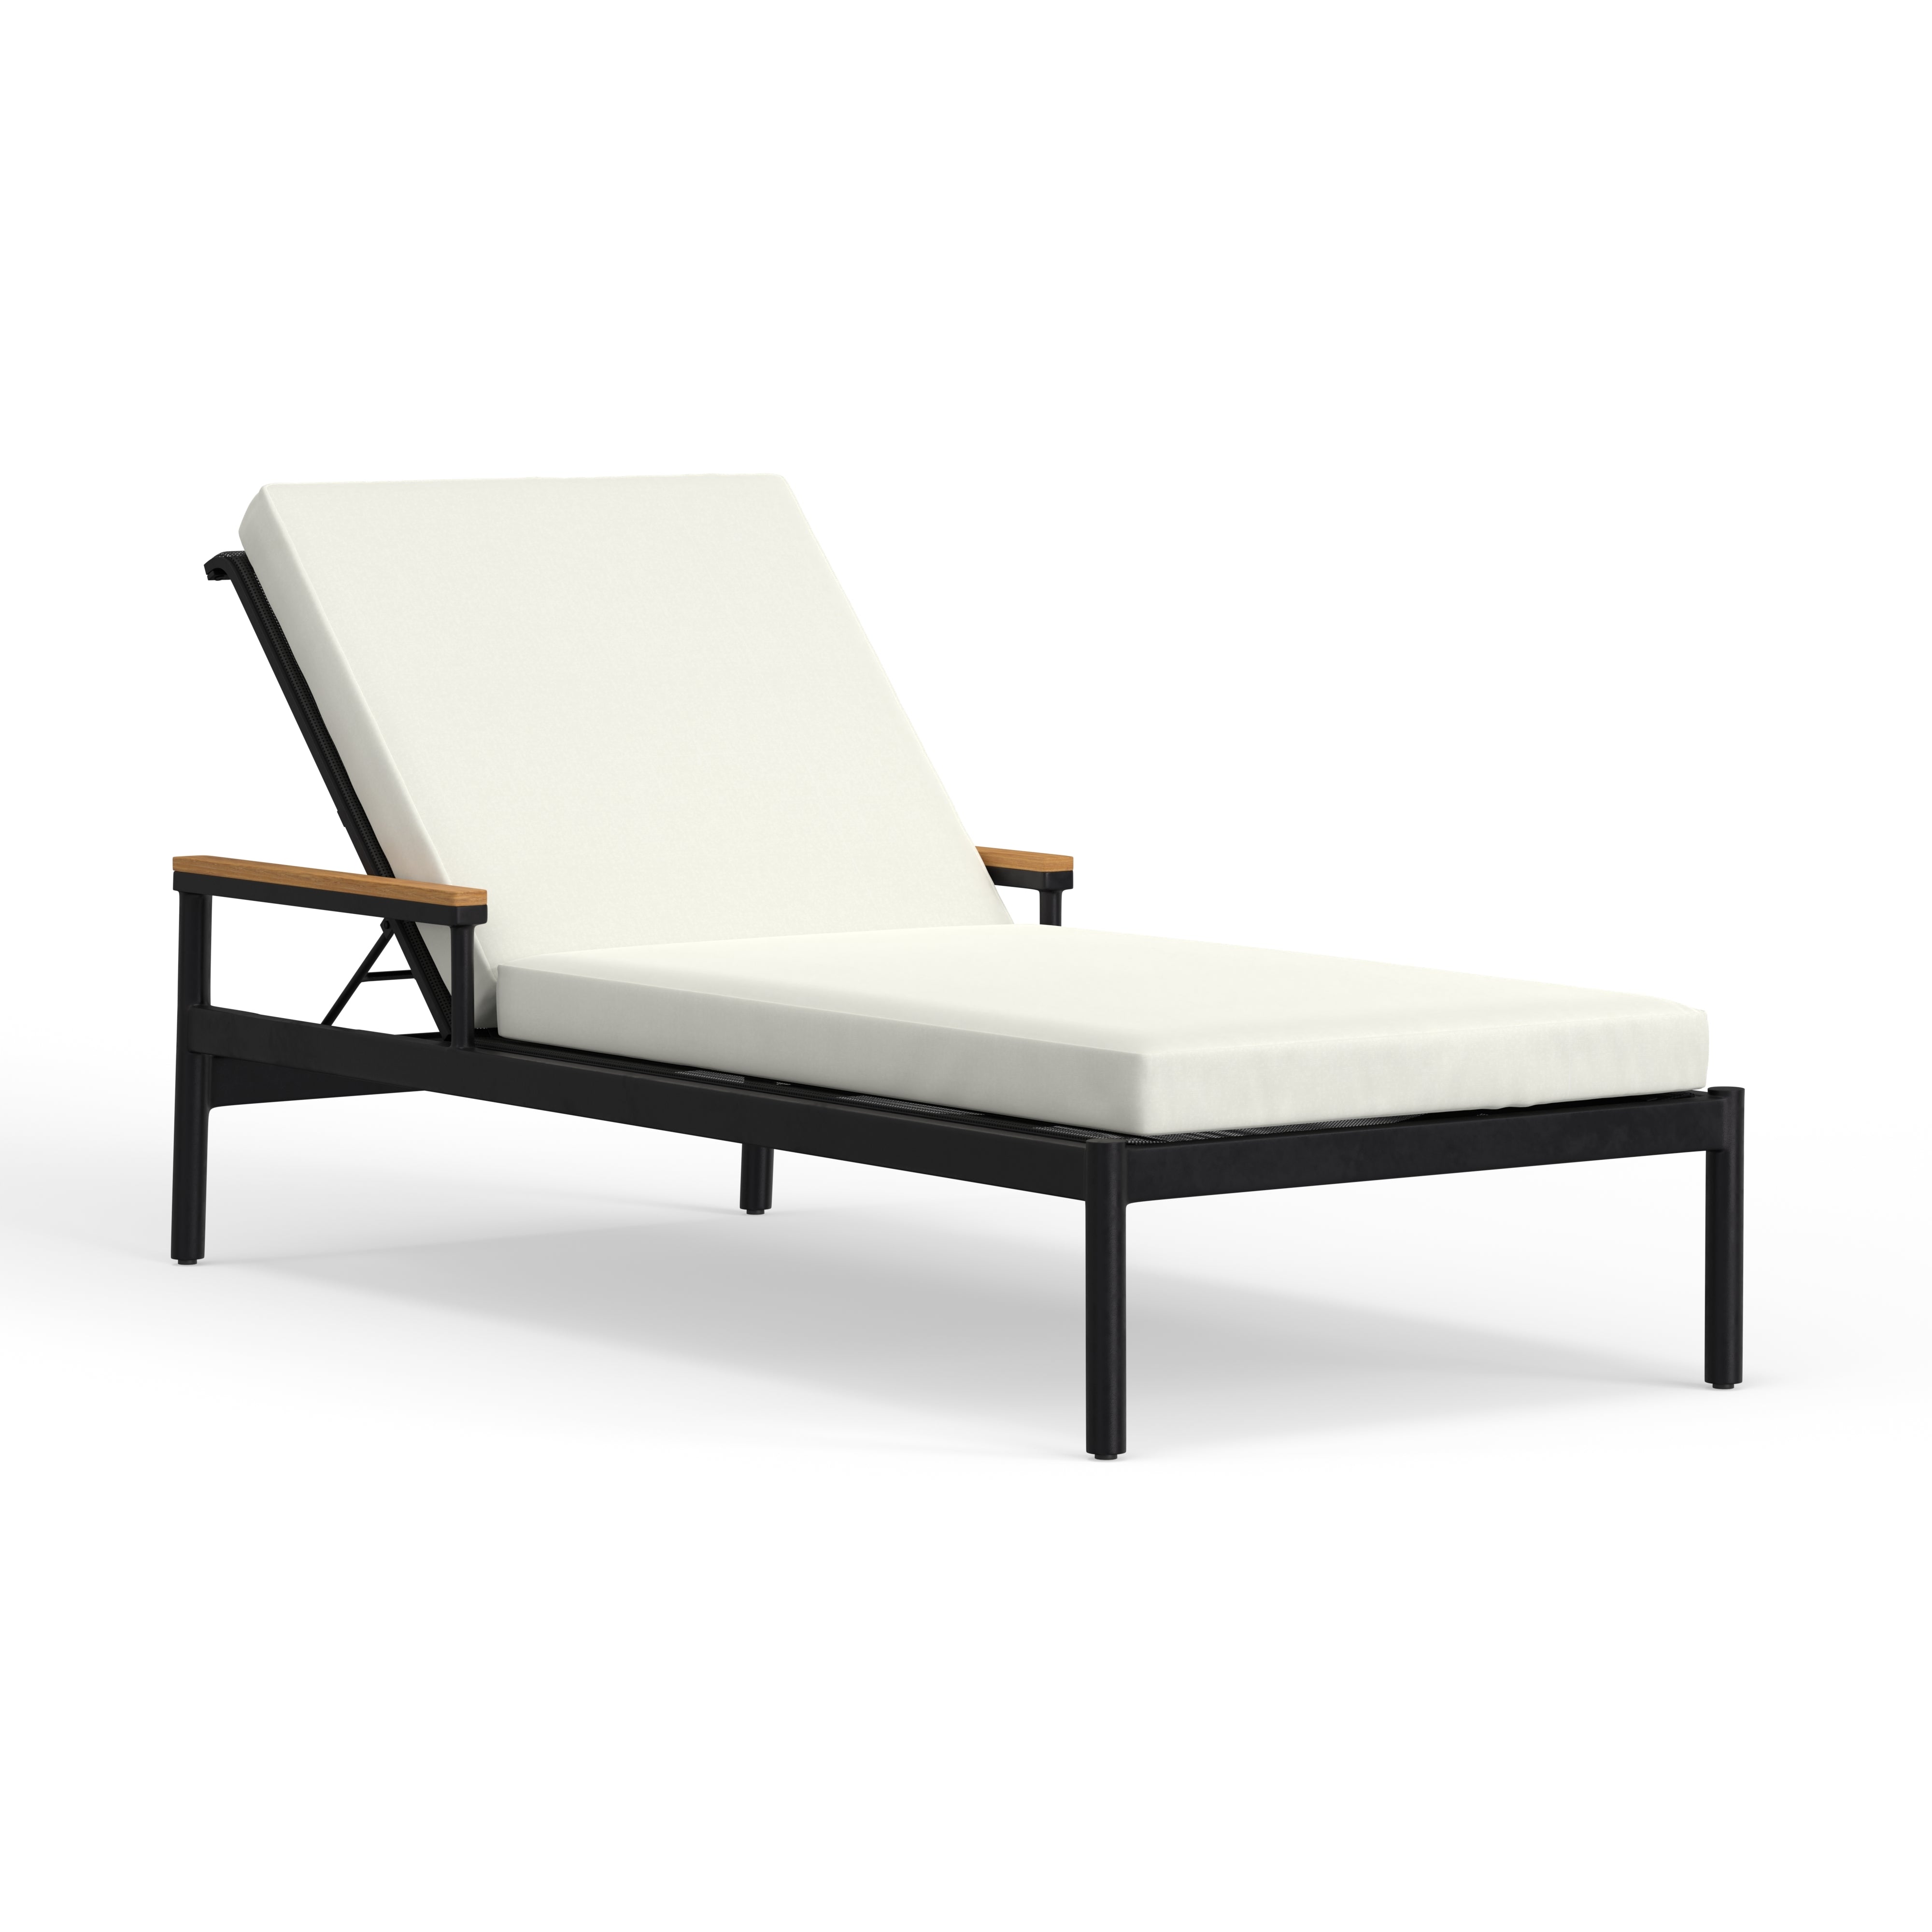 Highest Quality Outdoor Aluminum Chaise Lounge Chair